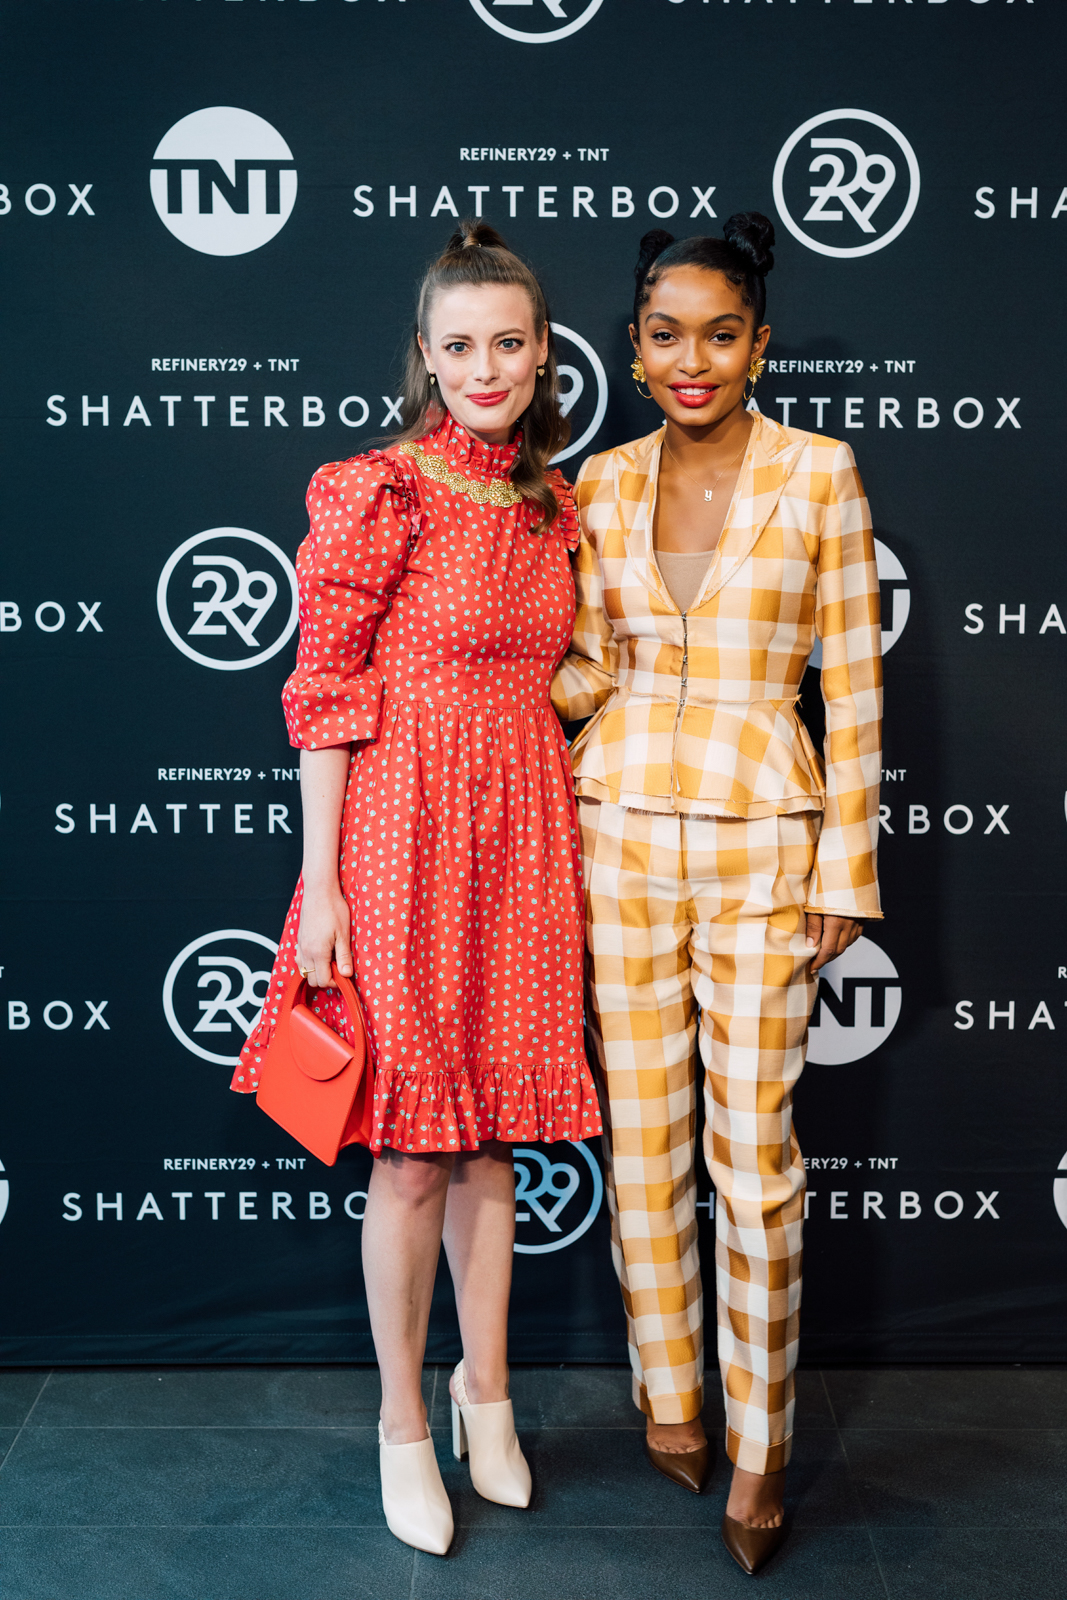 Two women posing at the shatterbox event for event photography.